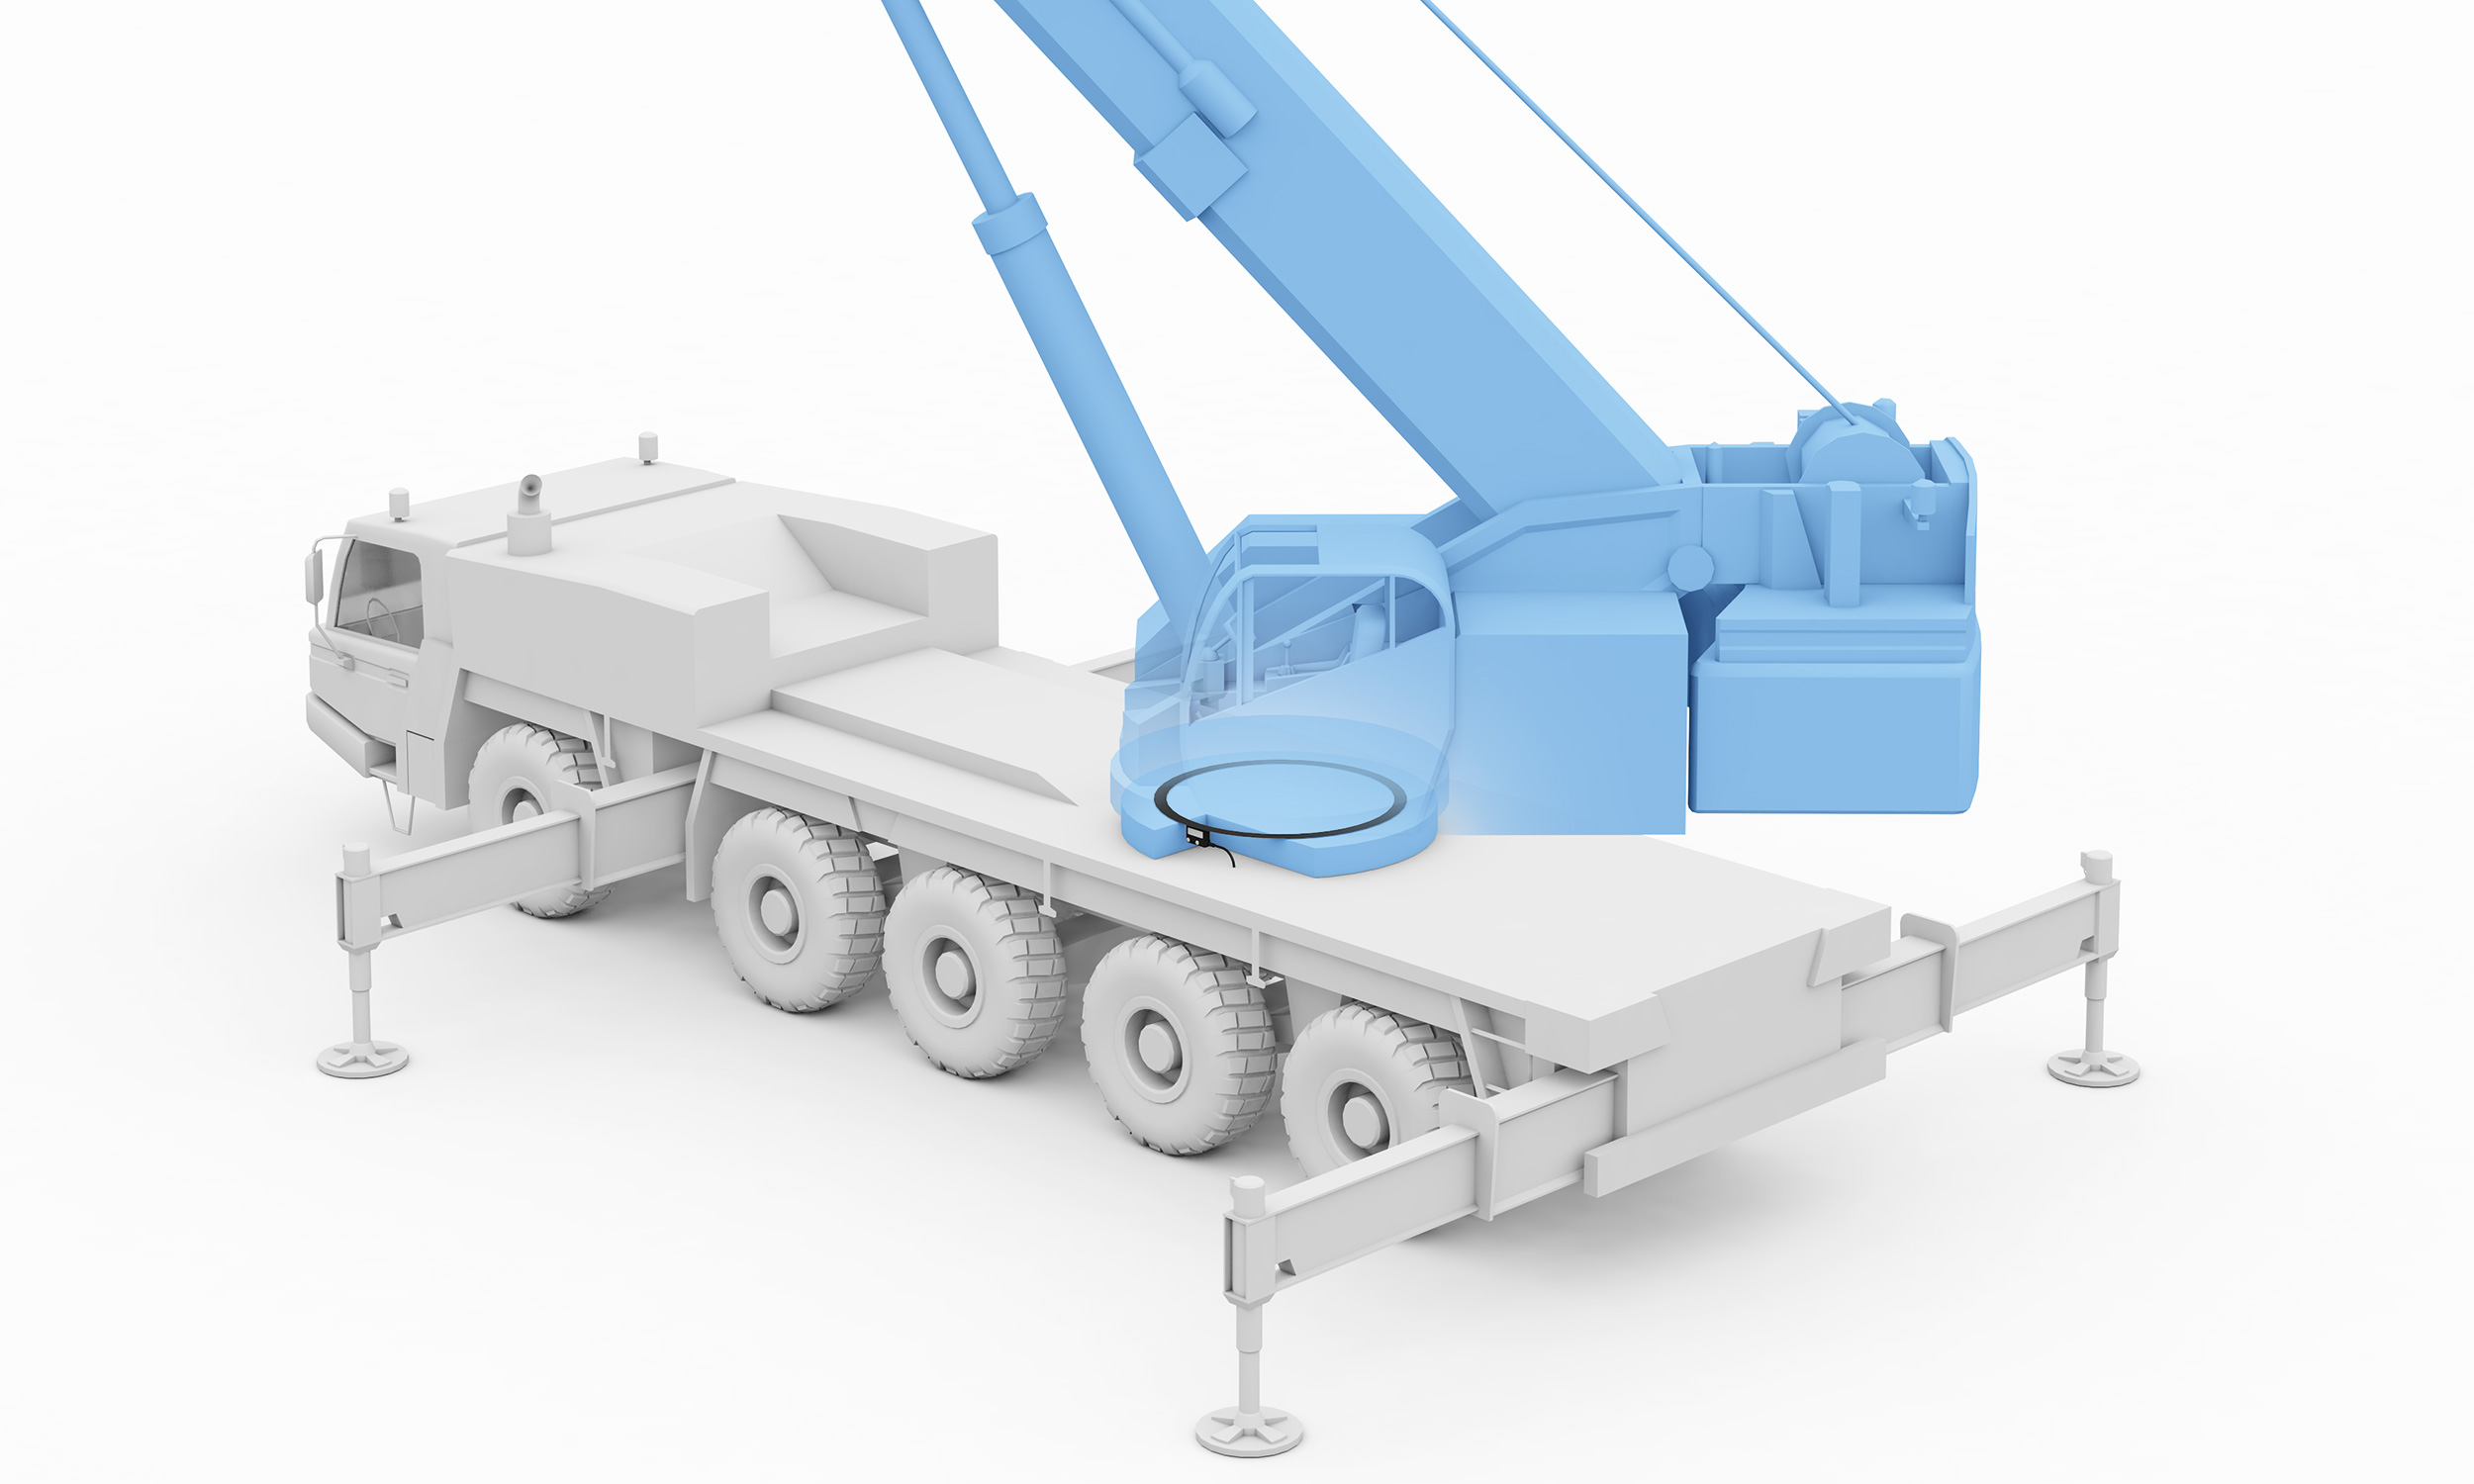 Mobile Crane: Detecting the Position of the Mobile Crane over 360° image